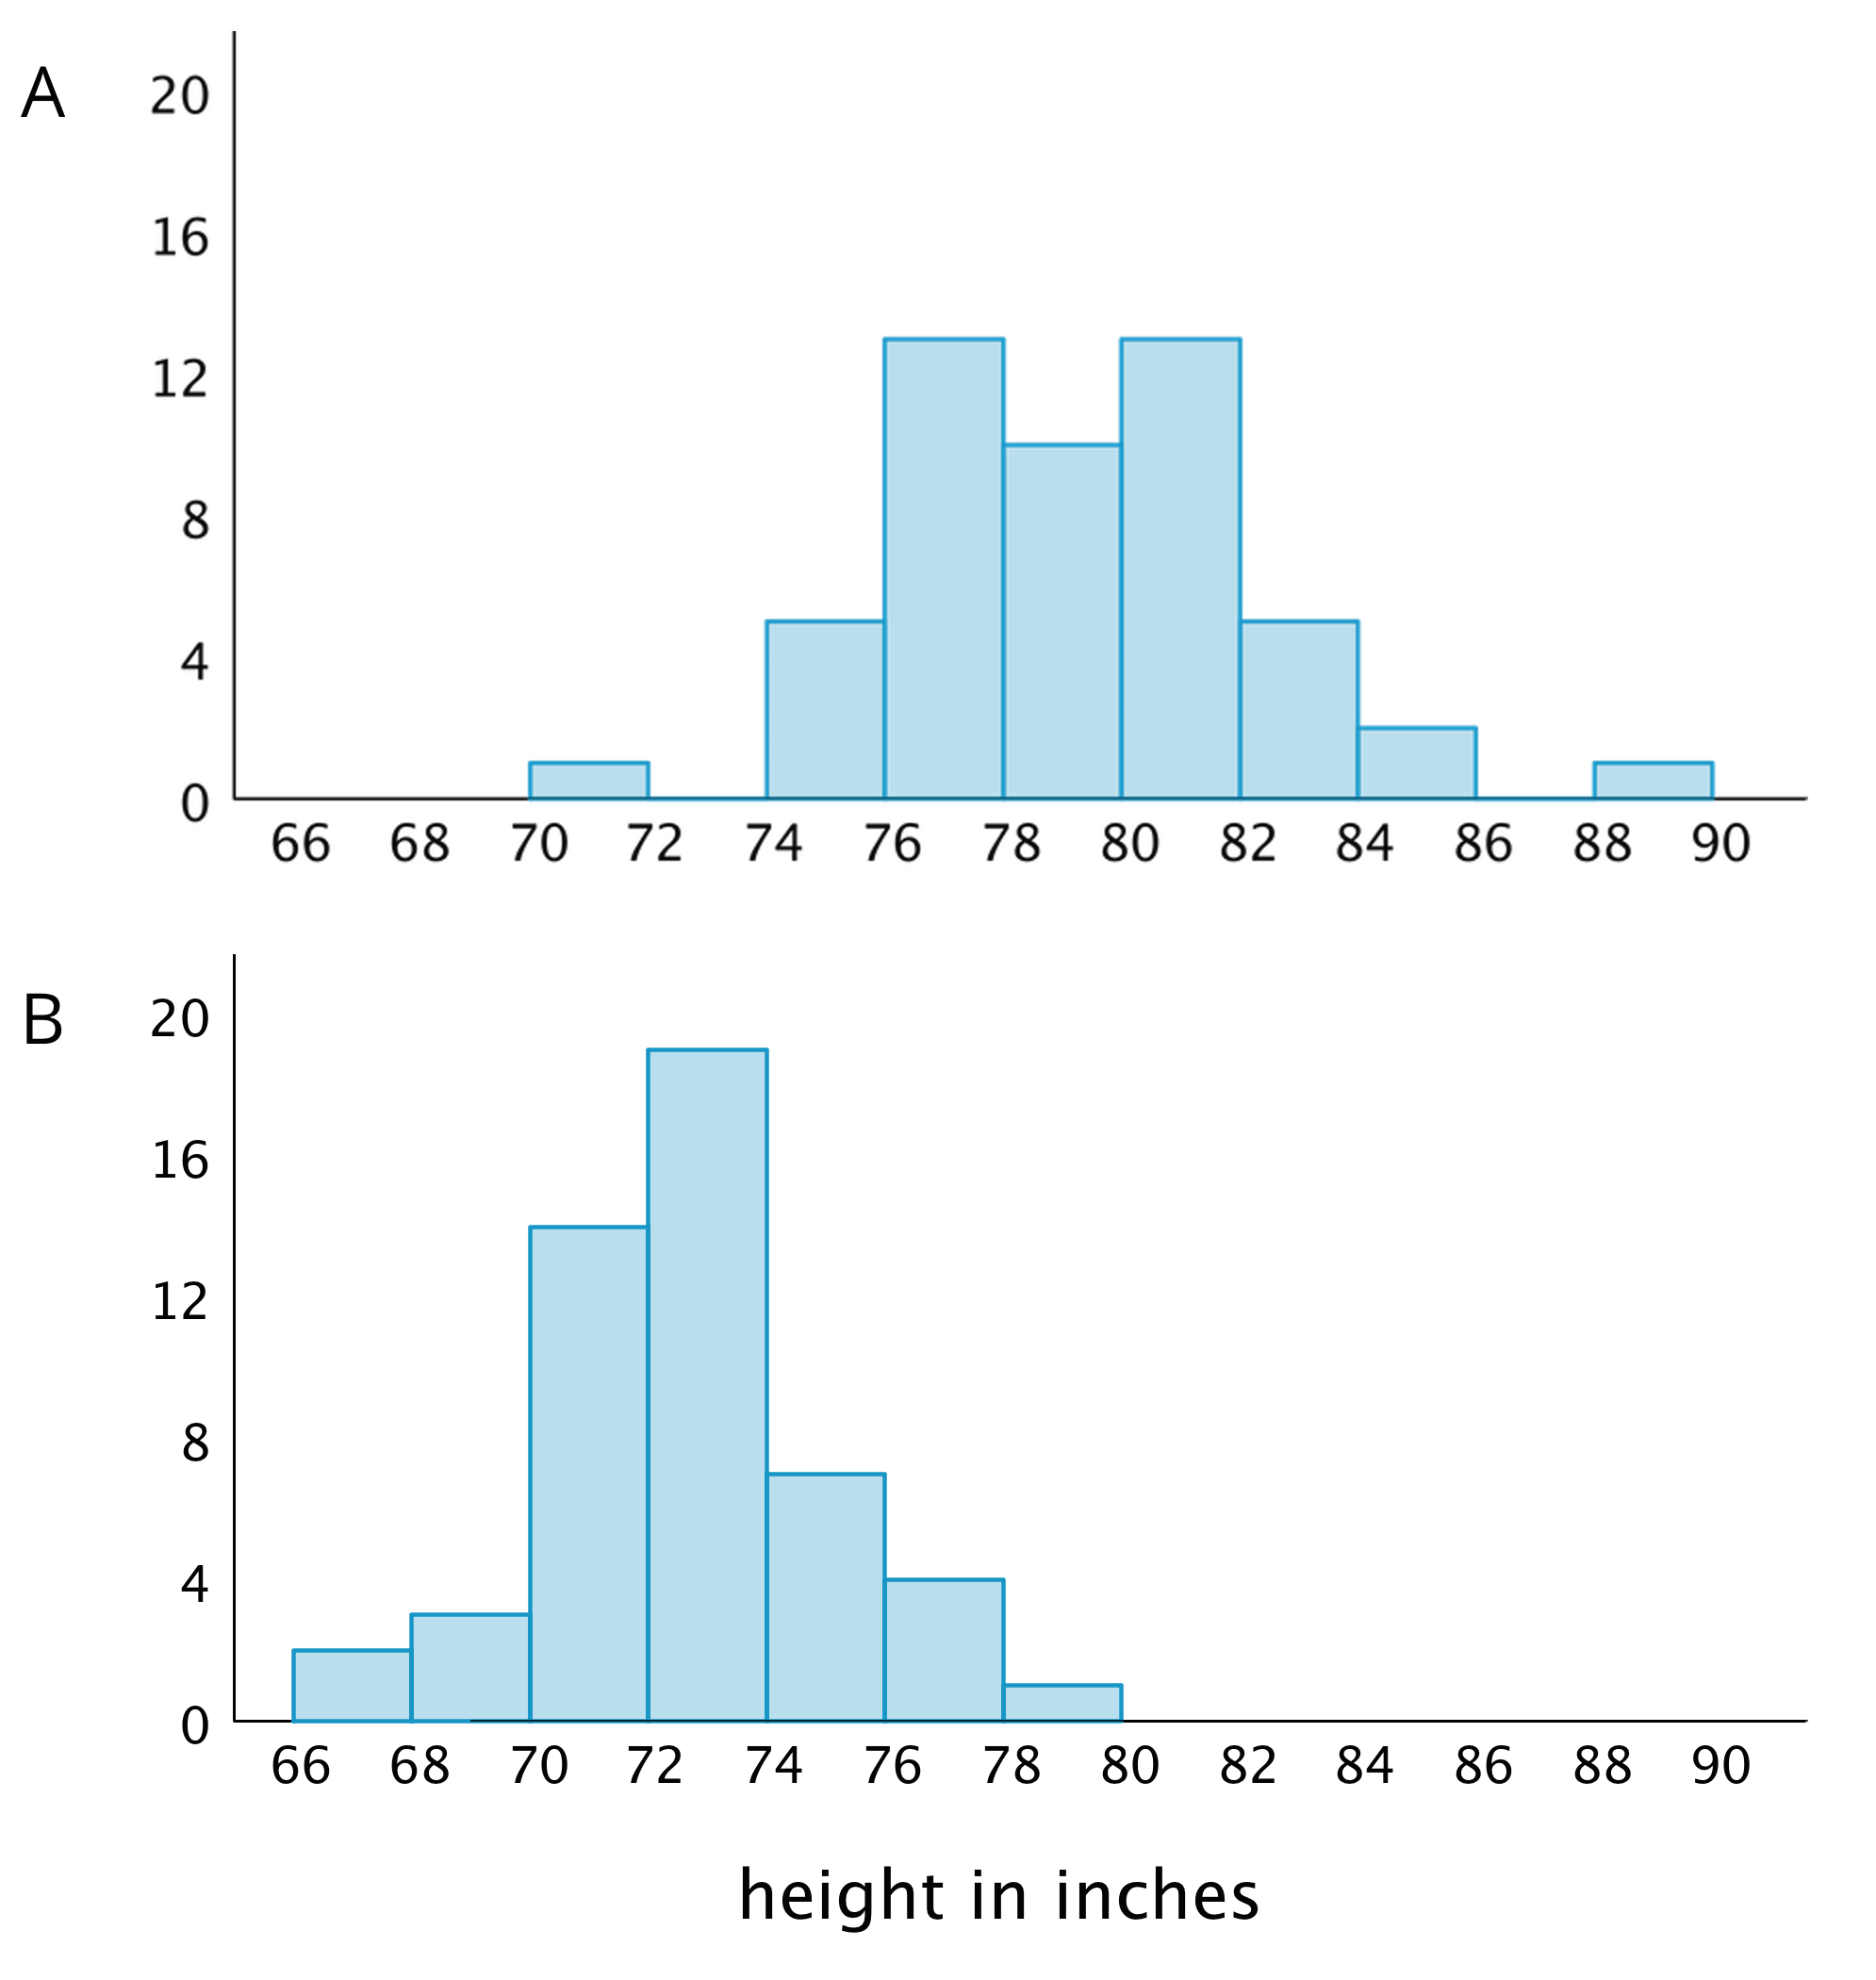 Two histograms: Labeled A and B. On each histogram, the horizontal axes are labeled “height in inches” and the numbers 66 through 90, in increments of 2, are indicated. On the vertical axes, the numbers 0 through 20, in increments of 4, are indicated.  The data for histogram A are as follows: Length from 66 up to 68, 0. Length from 68 up to 70, 0. Length from 70 up to 72, 1. Length from 72 up to 74, 0. Length from 74 up to 76, 5. Length from 76 up to 78, 14. Length from 78 up to 80, 10. Length from 80 up to 82, 14. Length from 82 up to 84, 5. Length from 84 up to 86, 2. Length from 86 up to 88, 0. Length from 88 up to 90, 1.  The data for histogram B are as follows: Length from 66 up to 68, 2. Length from 68 up to 70, 3. Length from 70 up to 72, 14. Length from 72 up to 74, 19. Length from 74 up to 76, 6. Length from 76 up to 78, 4. Length from 78 up to 80, 1. Length from 80 up to 82, 0. Length from 82 up to 84, 0. Length from 84 up to 86, 0. Length from 86 up to 88, 0. Length from 88 up to 90, 0.